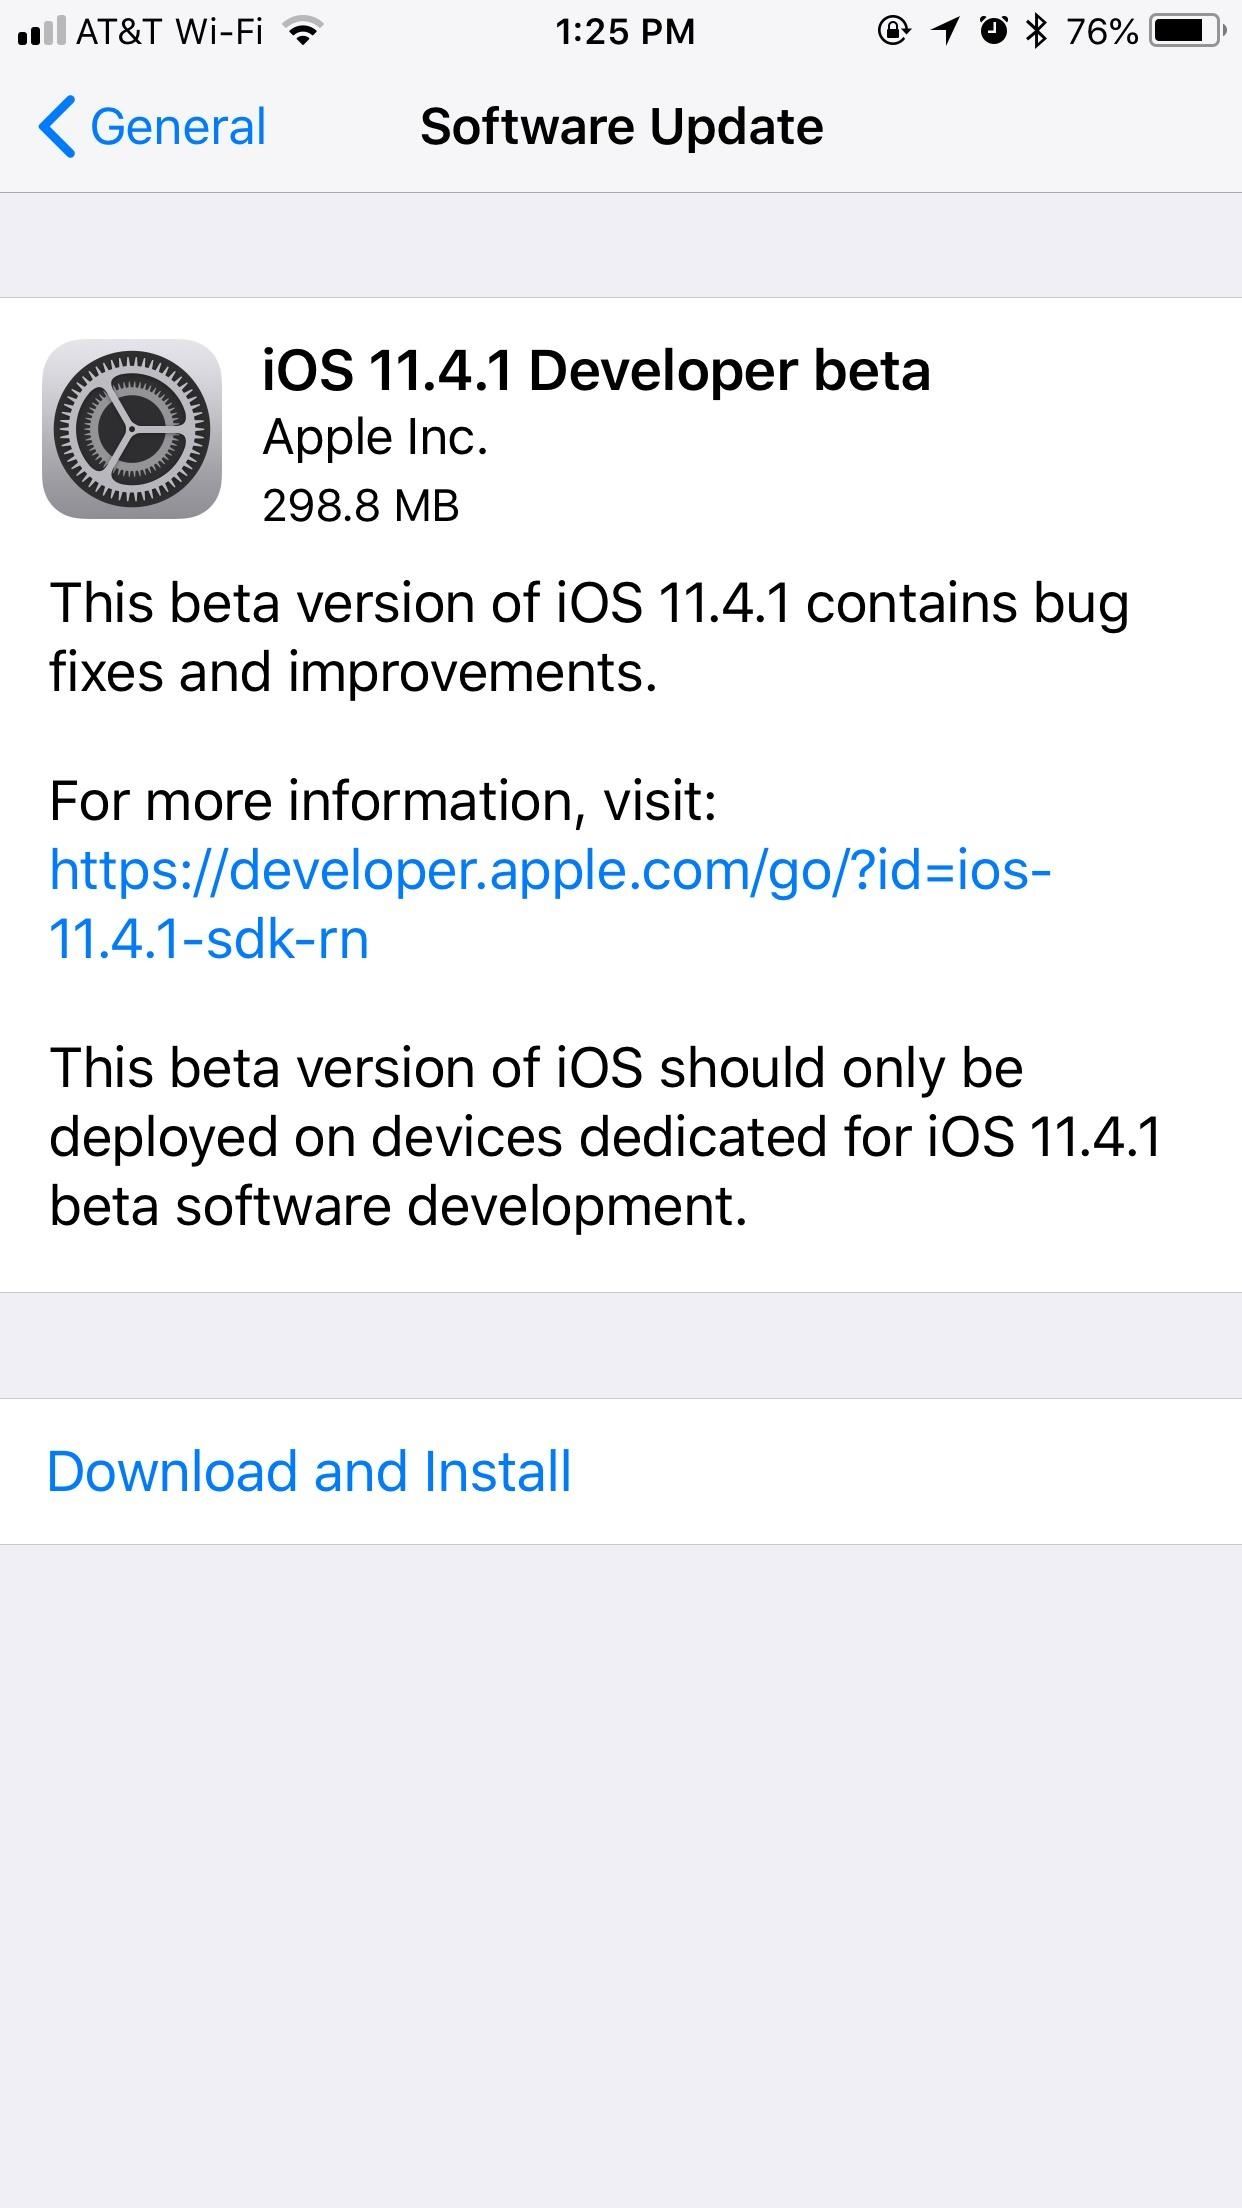 iOS 11.4.1 Beta Released for iPhones, Includes 'Bug Fixes & Improvements' Only